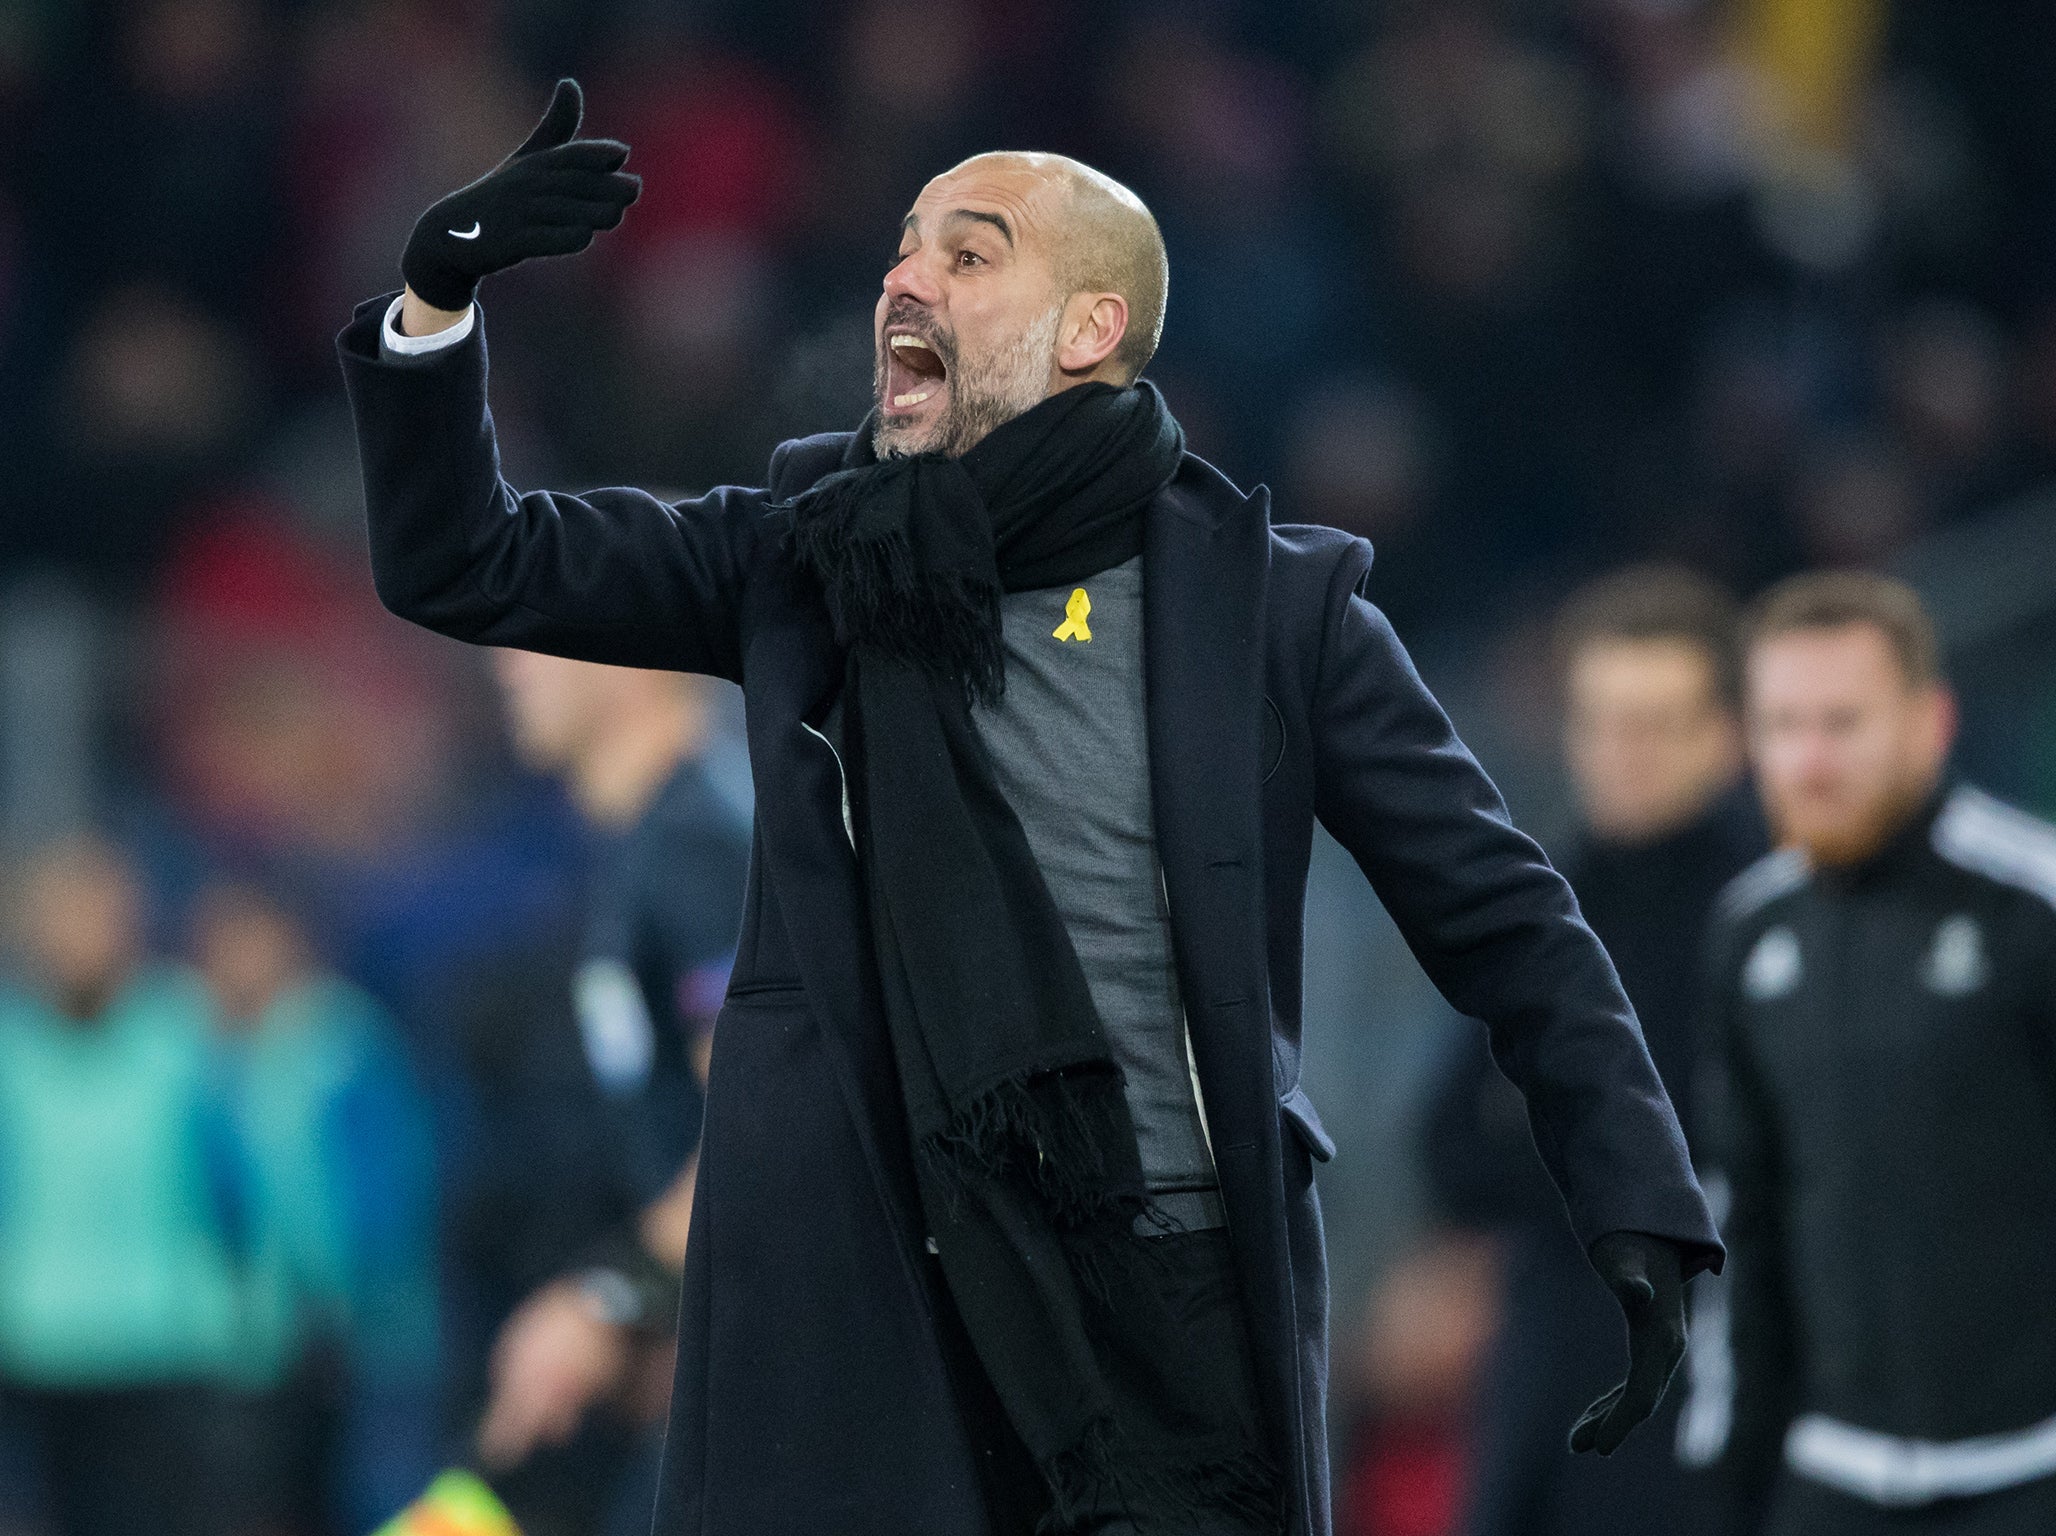 Pep Guardiola was delighted with the result